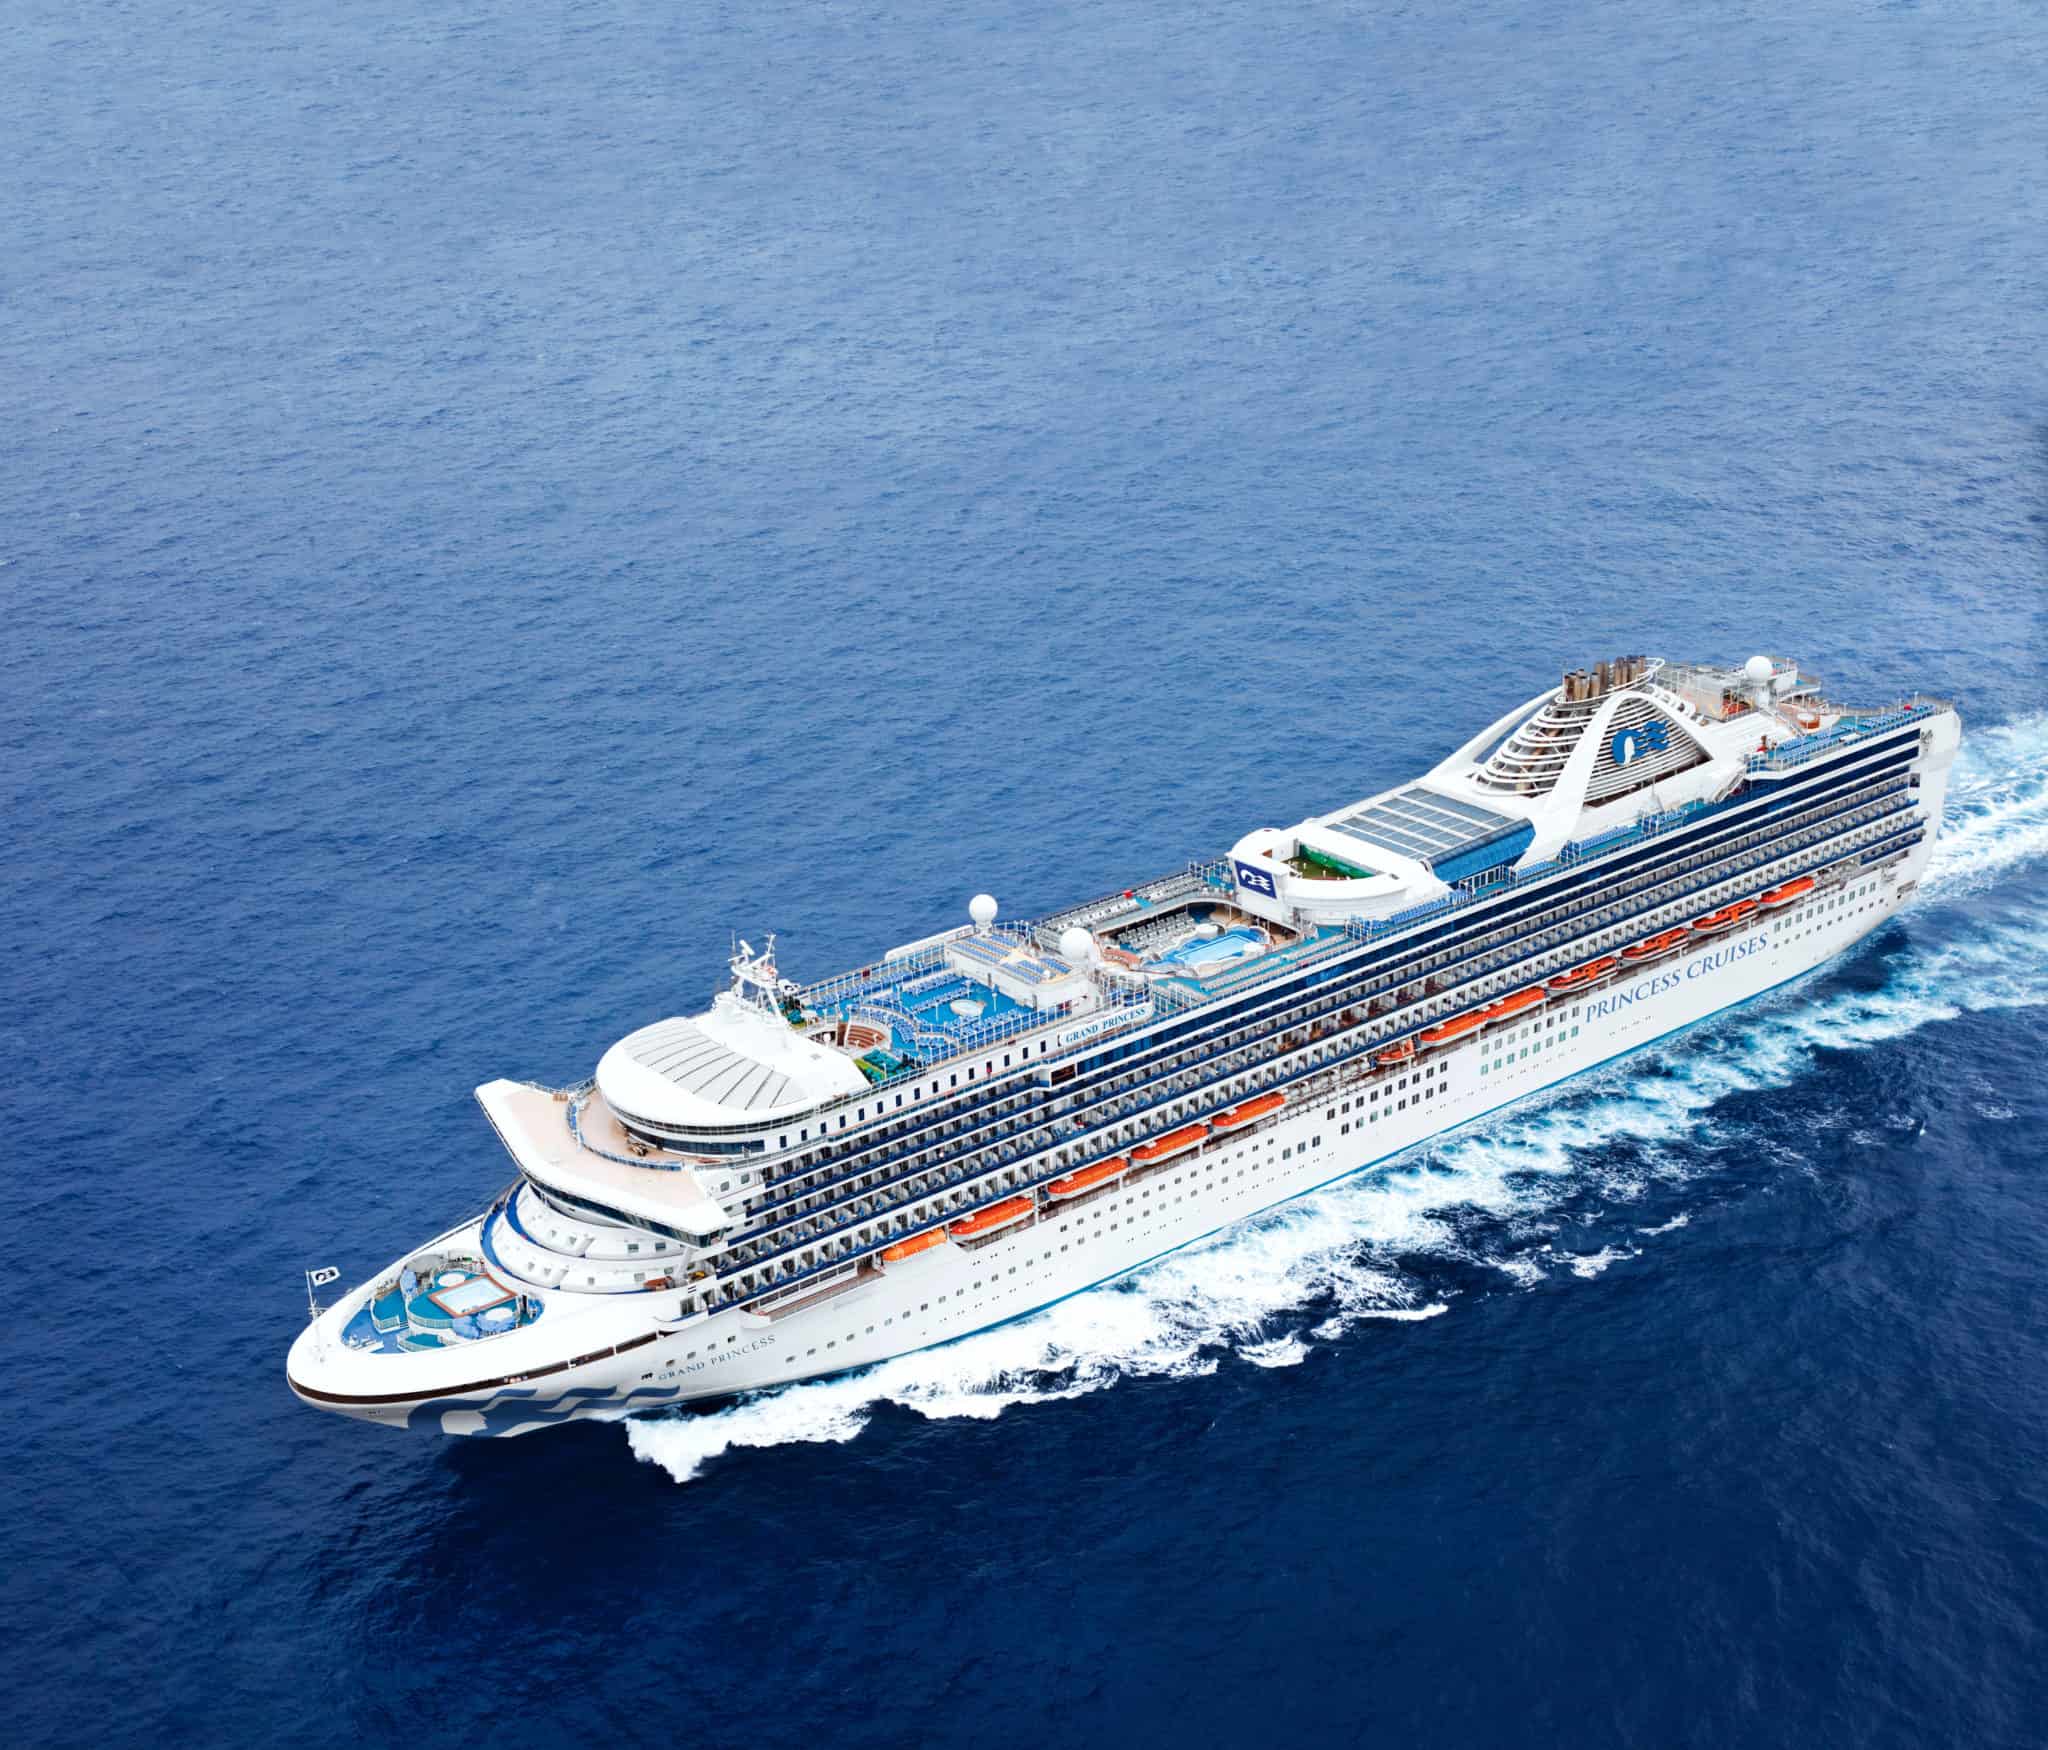 Where Princess Cruises Ships Will Go During 60 Day Suspension